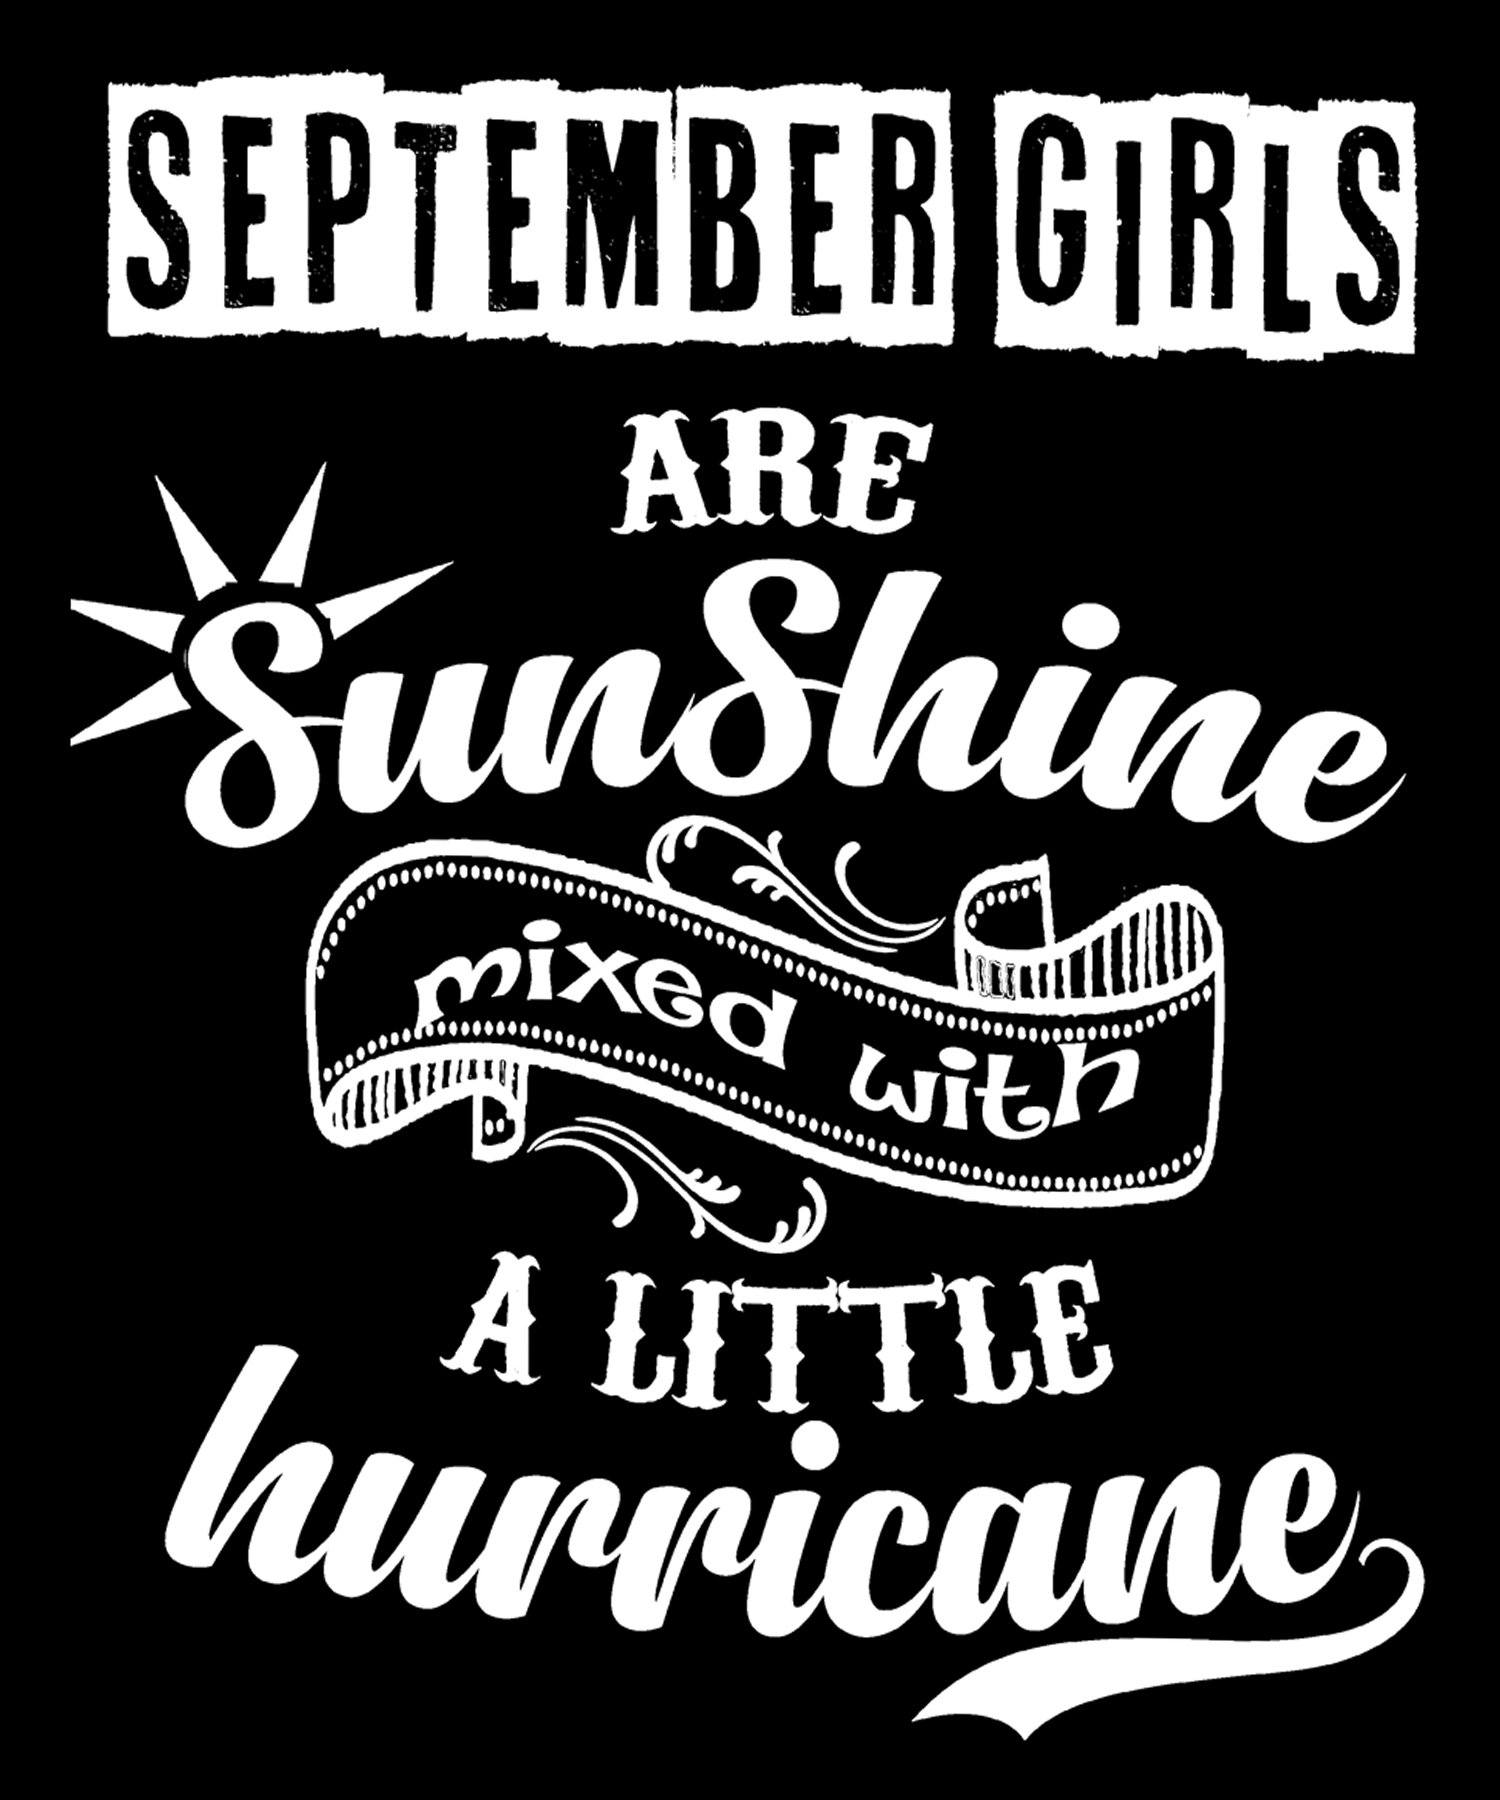 "September Girls Are Sunshine Mixed With Hurricane" Buy All Colors. Save Shipping.